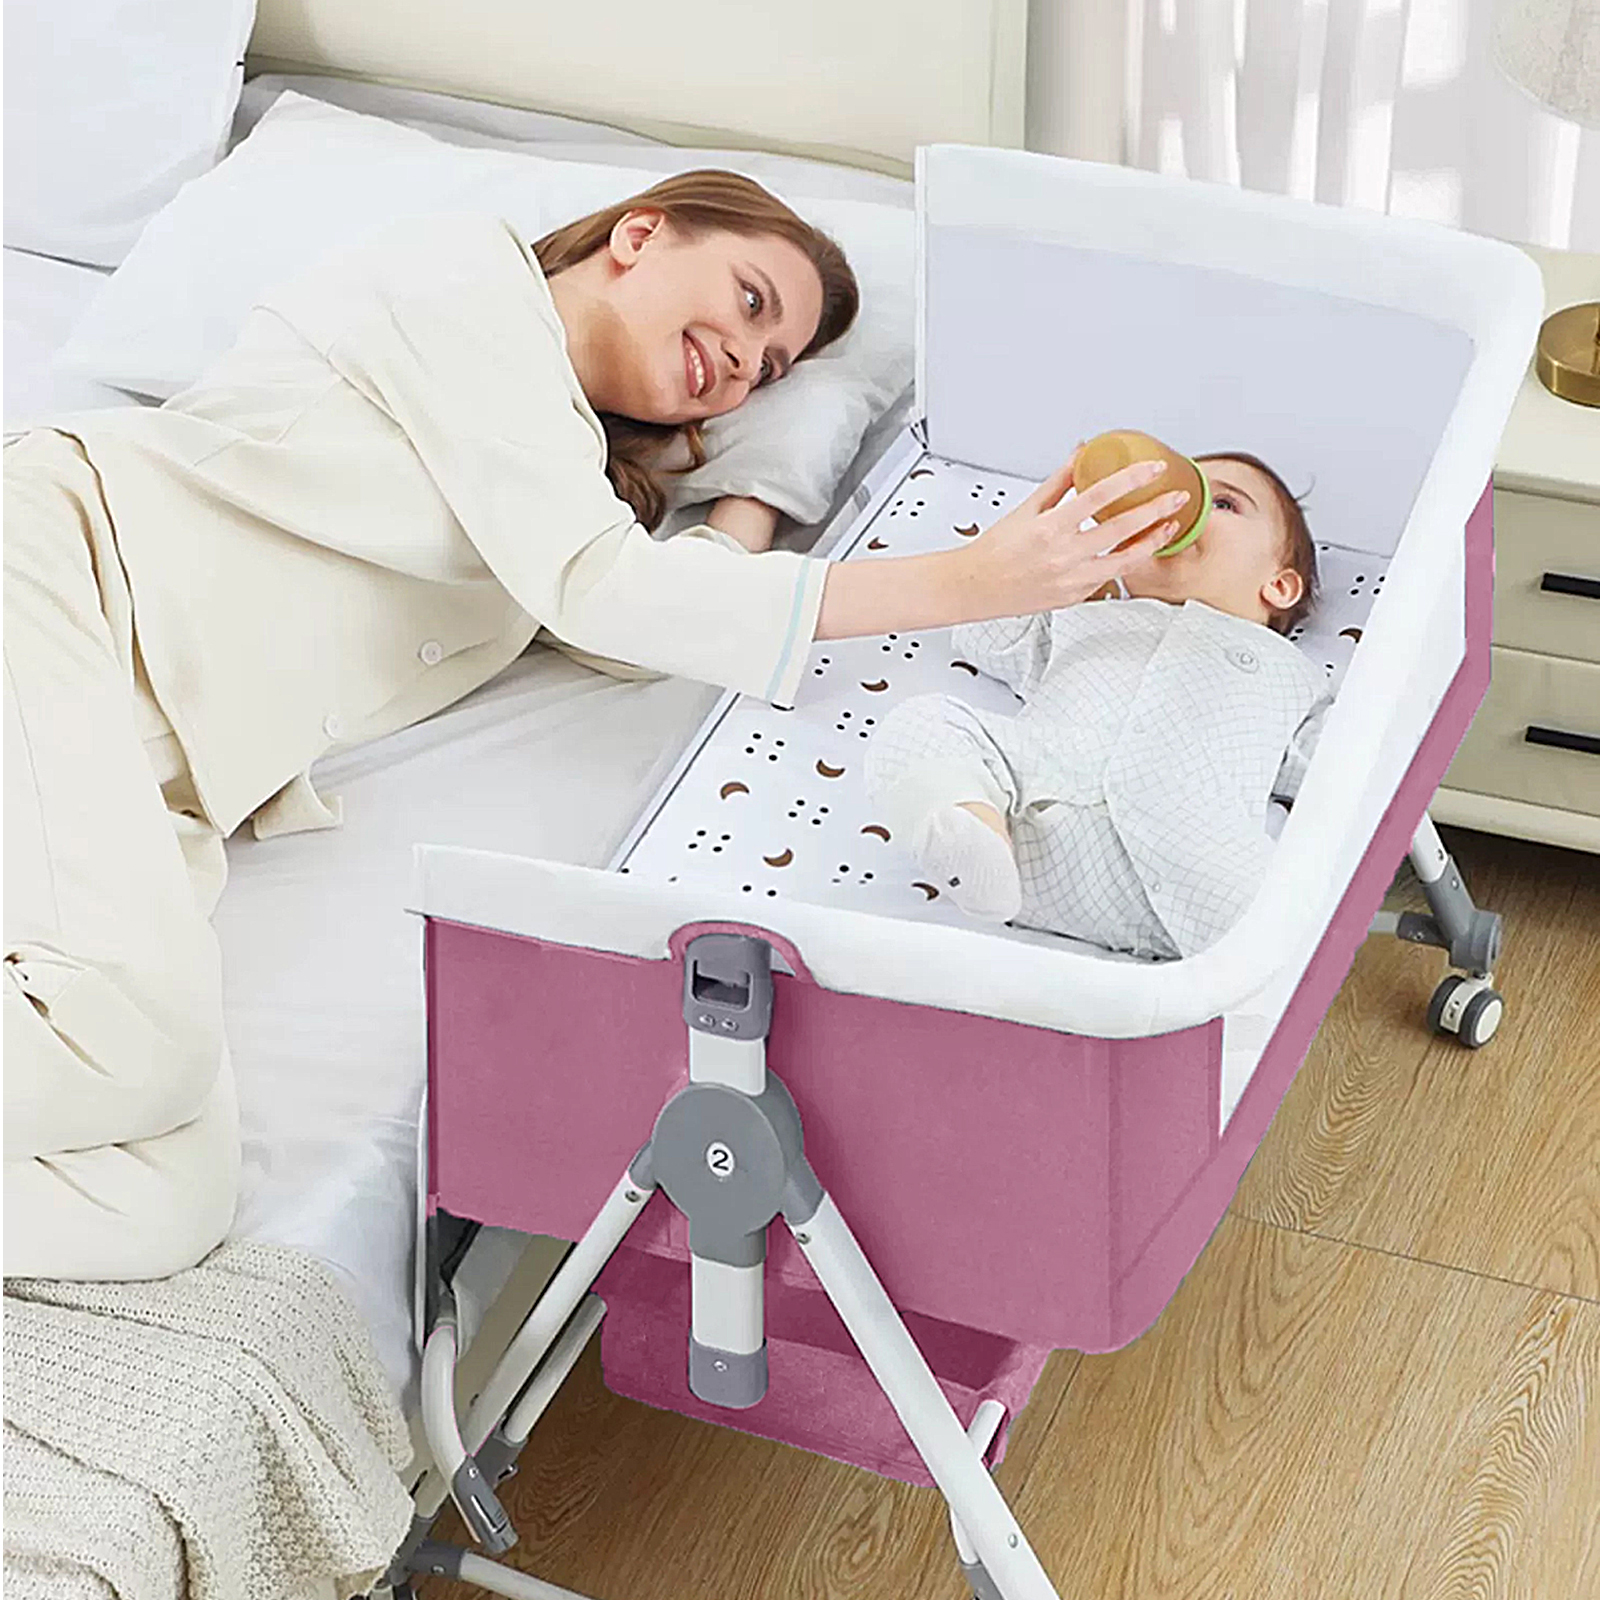 EONROACOO Foldable Baby Bassinet with Changing Table, Adjustable Bedside Crib for Infant, Pink - image 3 of 10